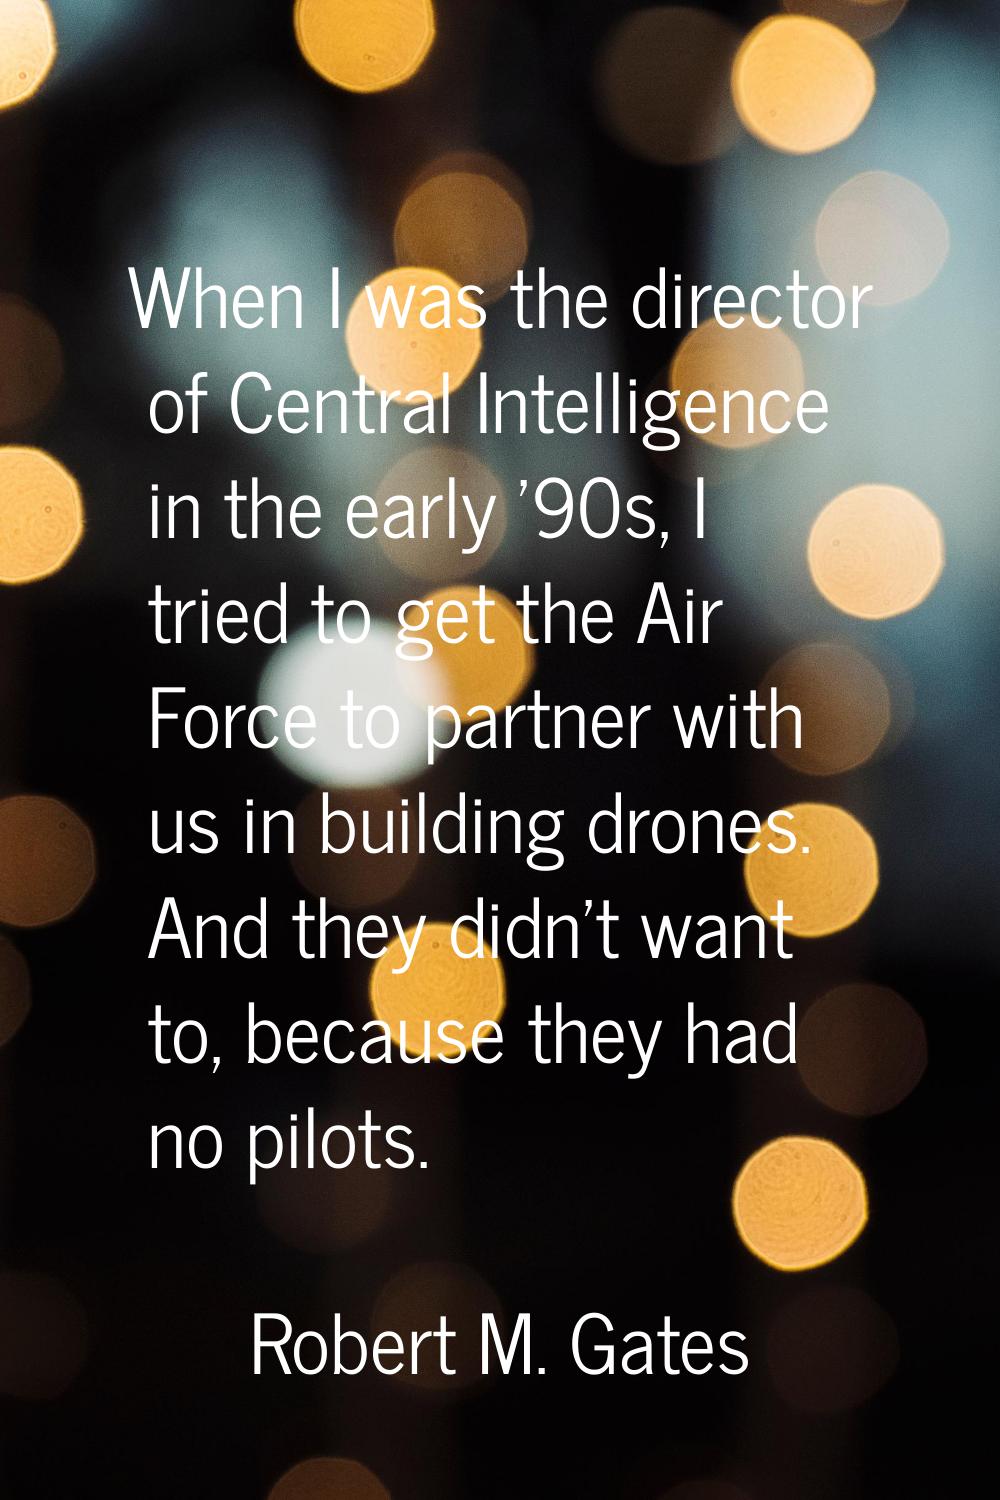 When I was the director of Central Intelligence in the early '90s, I tried to get the Air Force to 